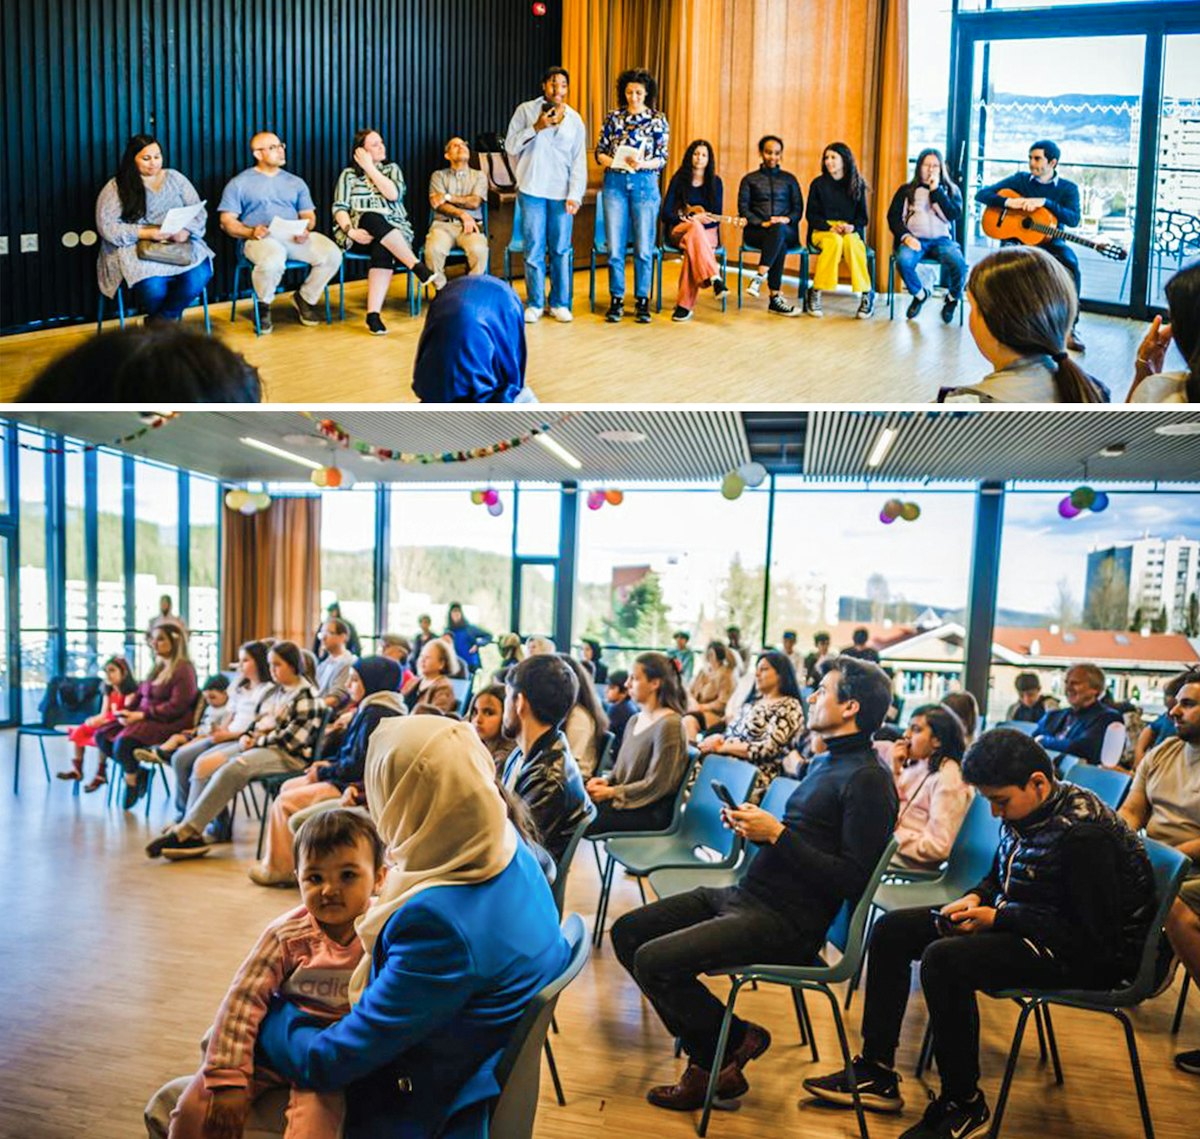 Pictured here are participants at a neighborhood conference in Drammen, Norway.